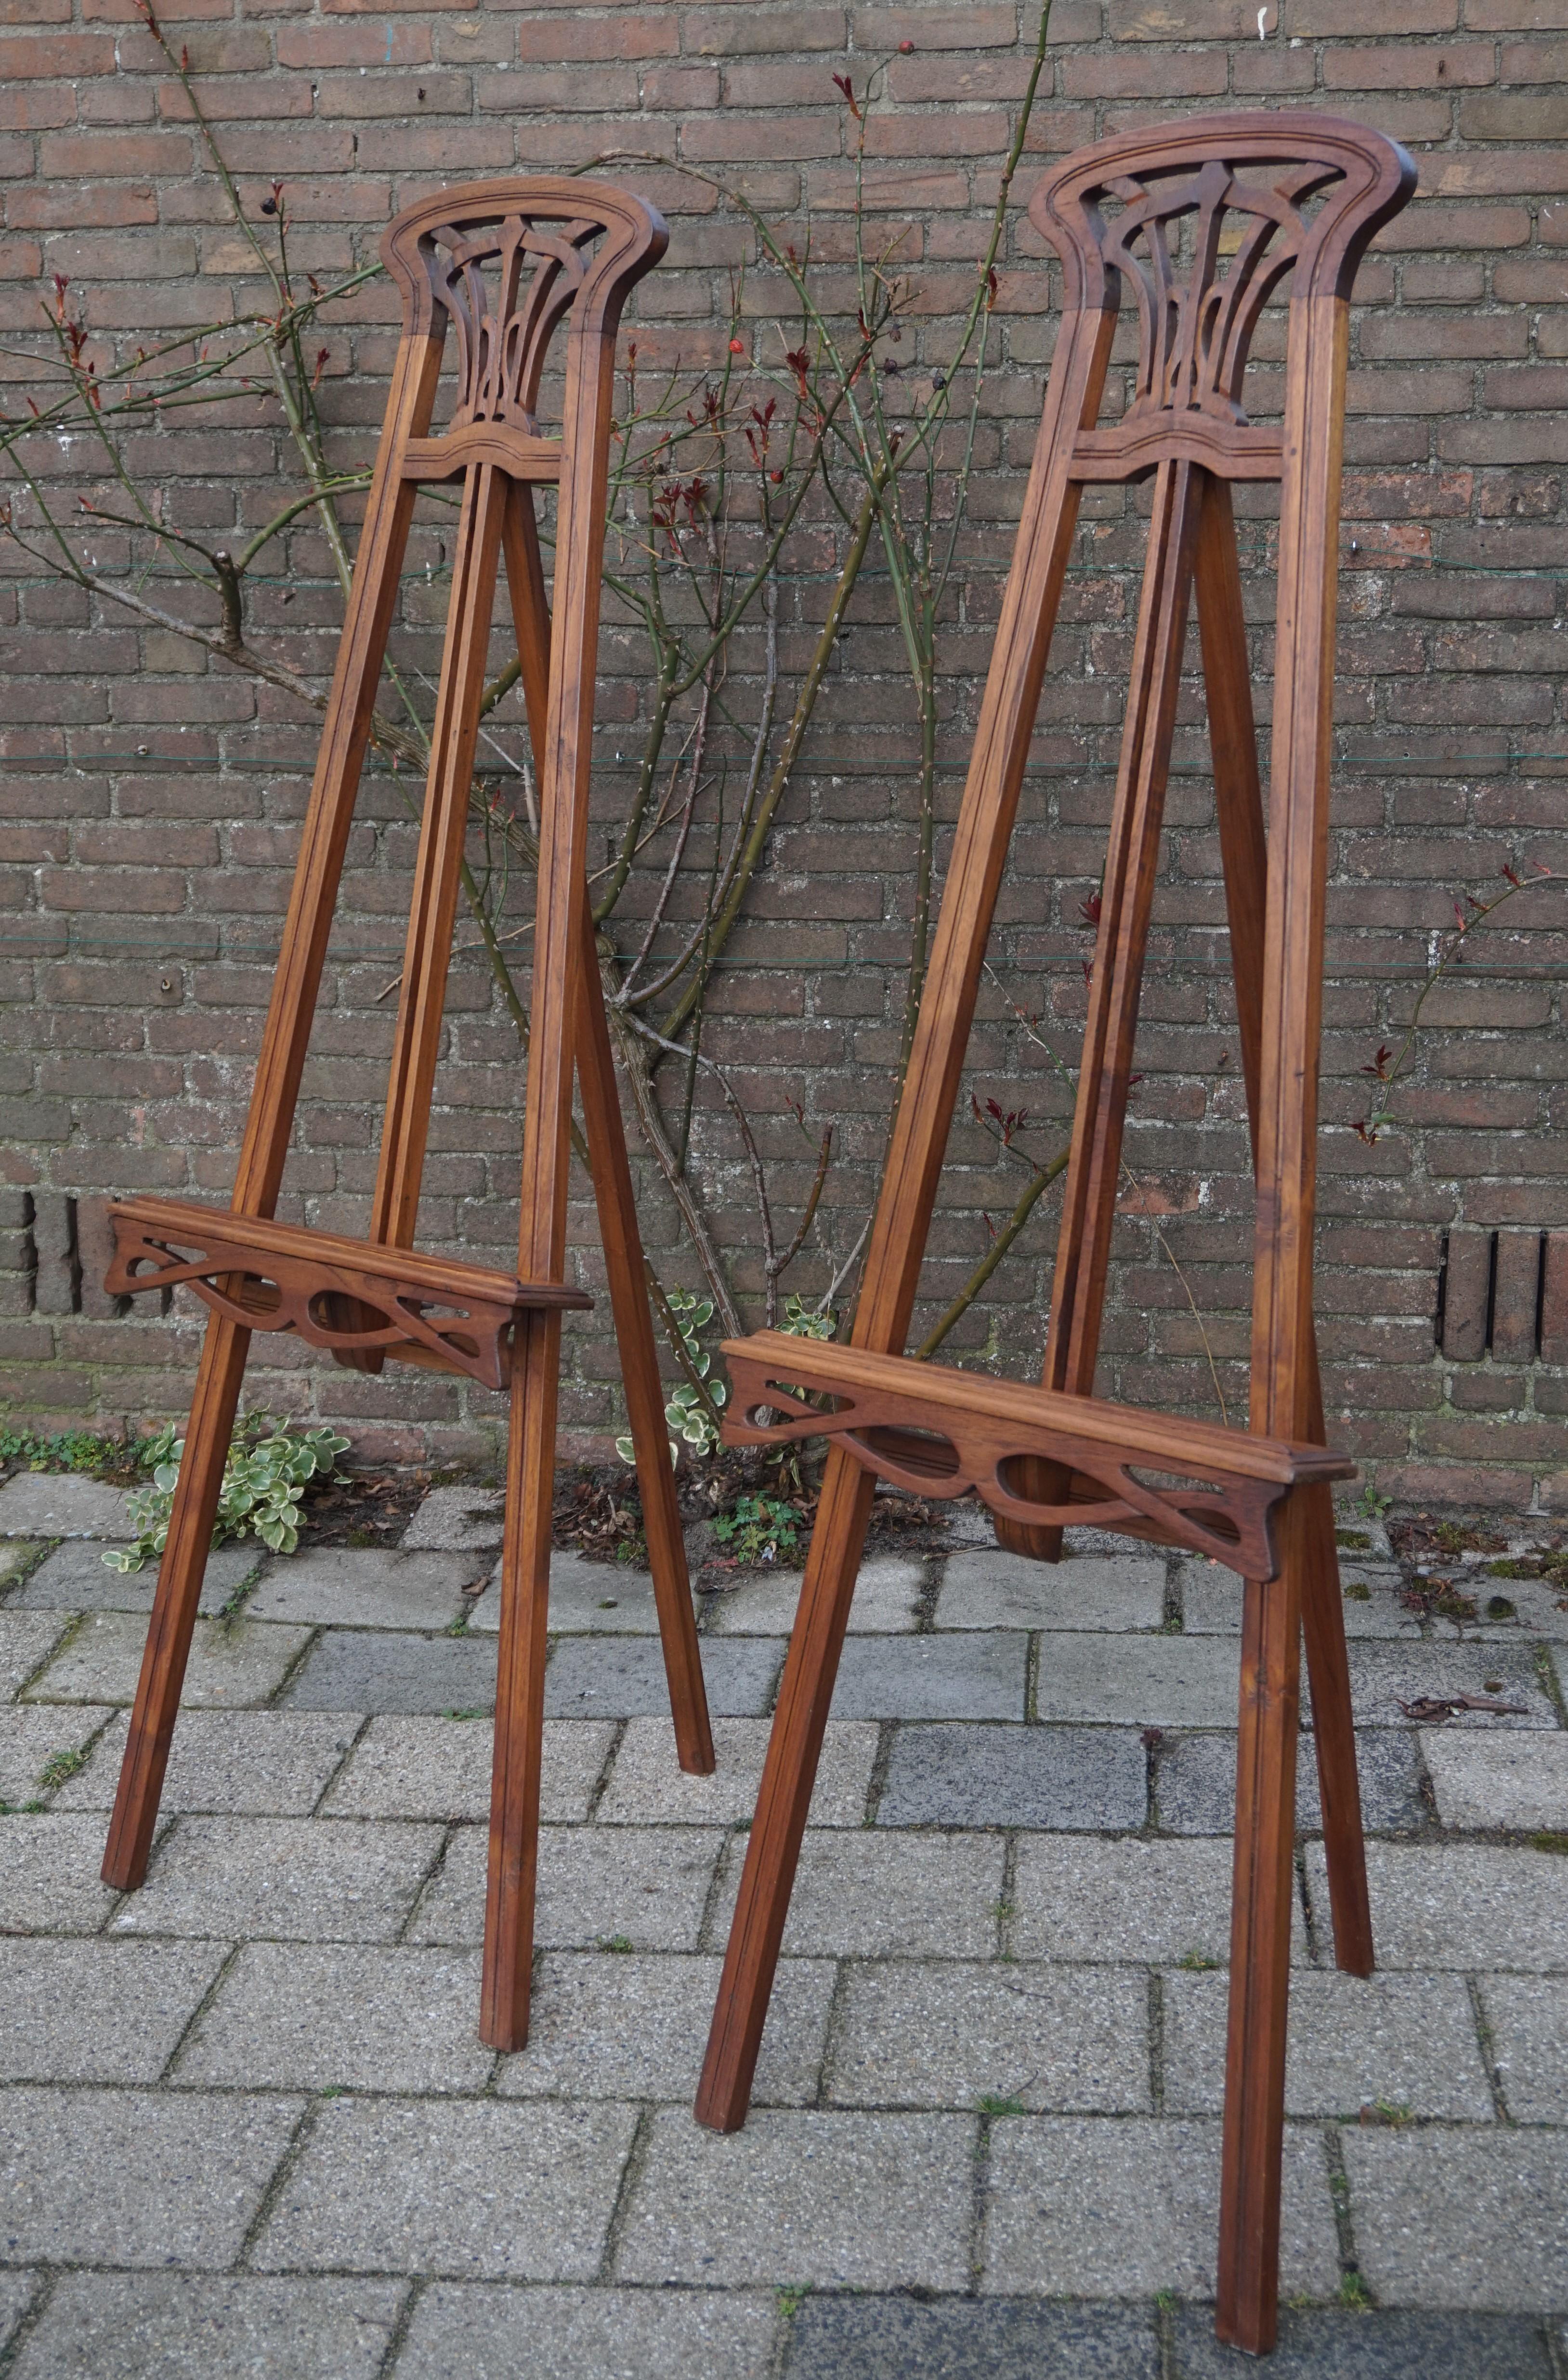 Early 20th century pair of teak wood painting stands. 

The family we acquired these easels from closed up their gallery about 15 years ago and these easels were gathering dust in the attick. Luckily through a mutual acquaintance we found out about